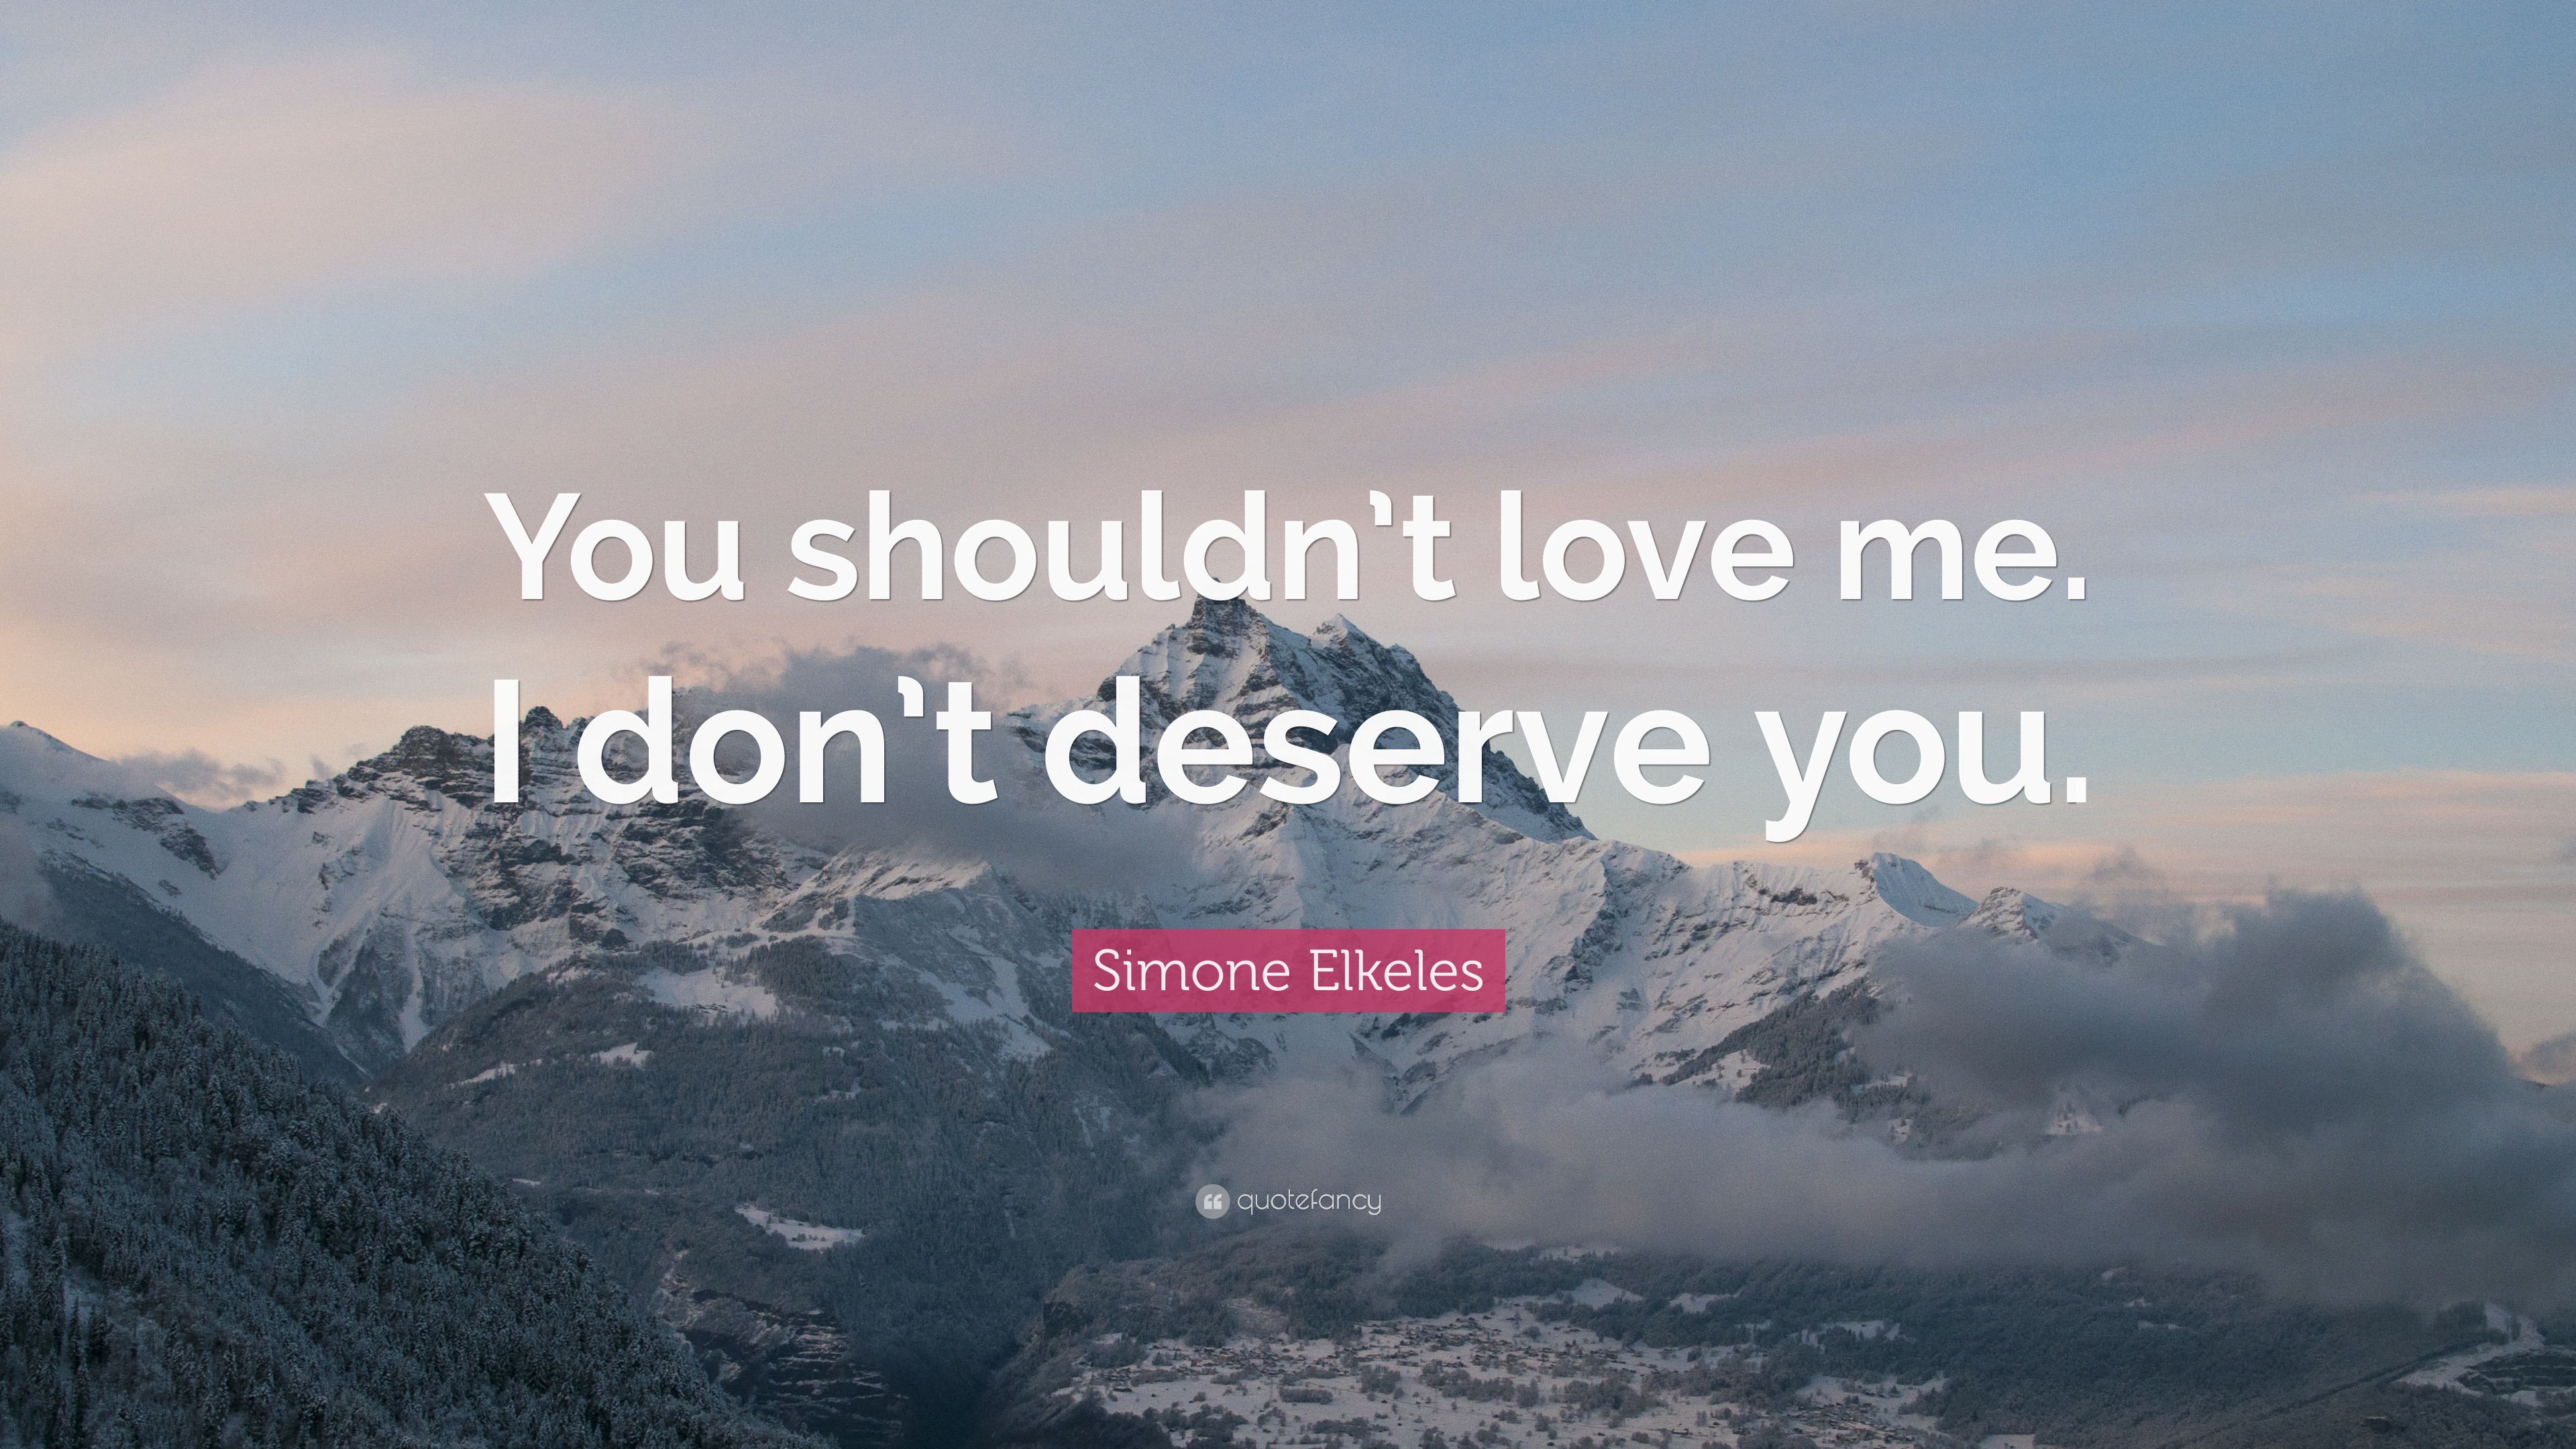 Simone Elkeles Quote “You shouldn t love me I don t